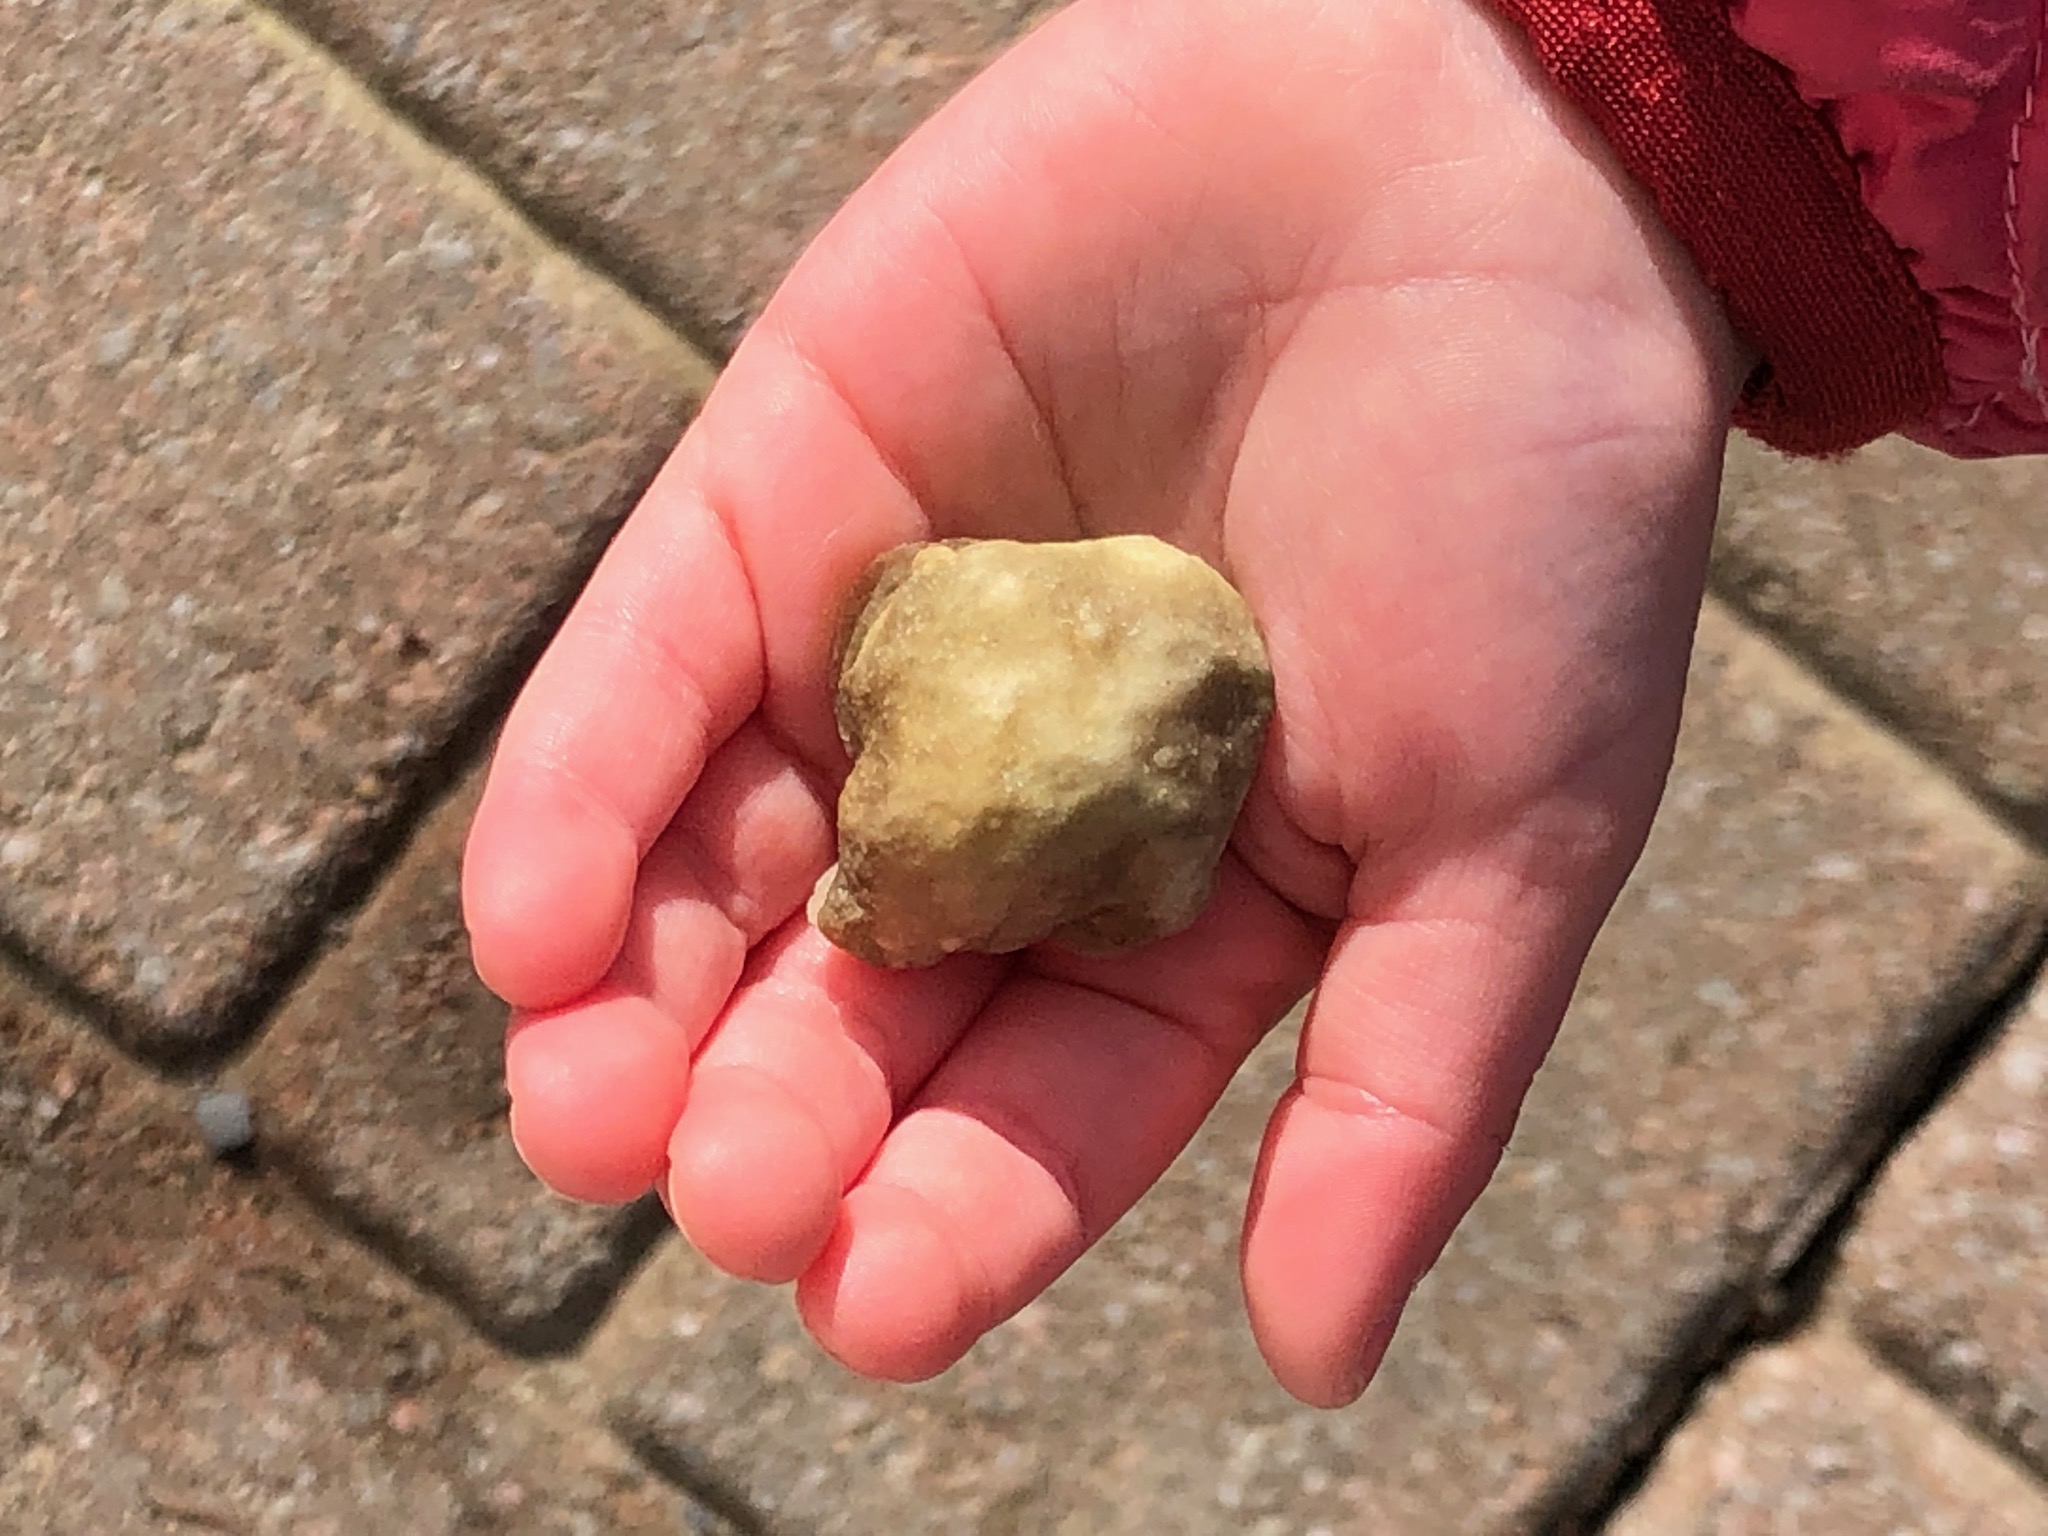 A child's hand holds out a crafted moon rock in their open palm